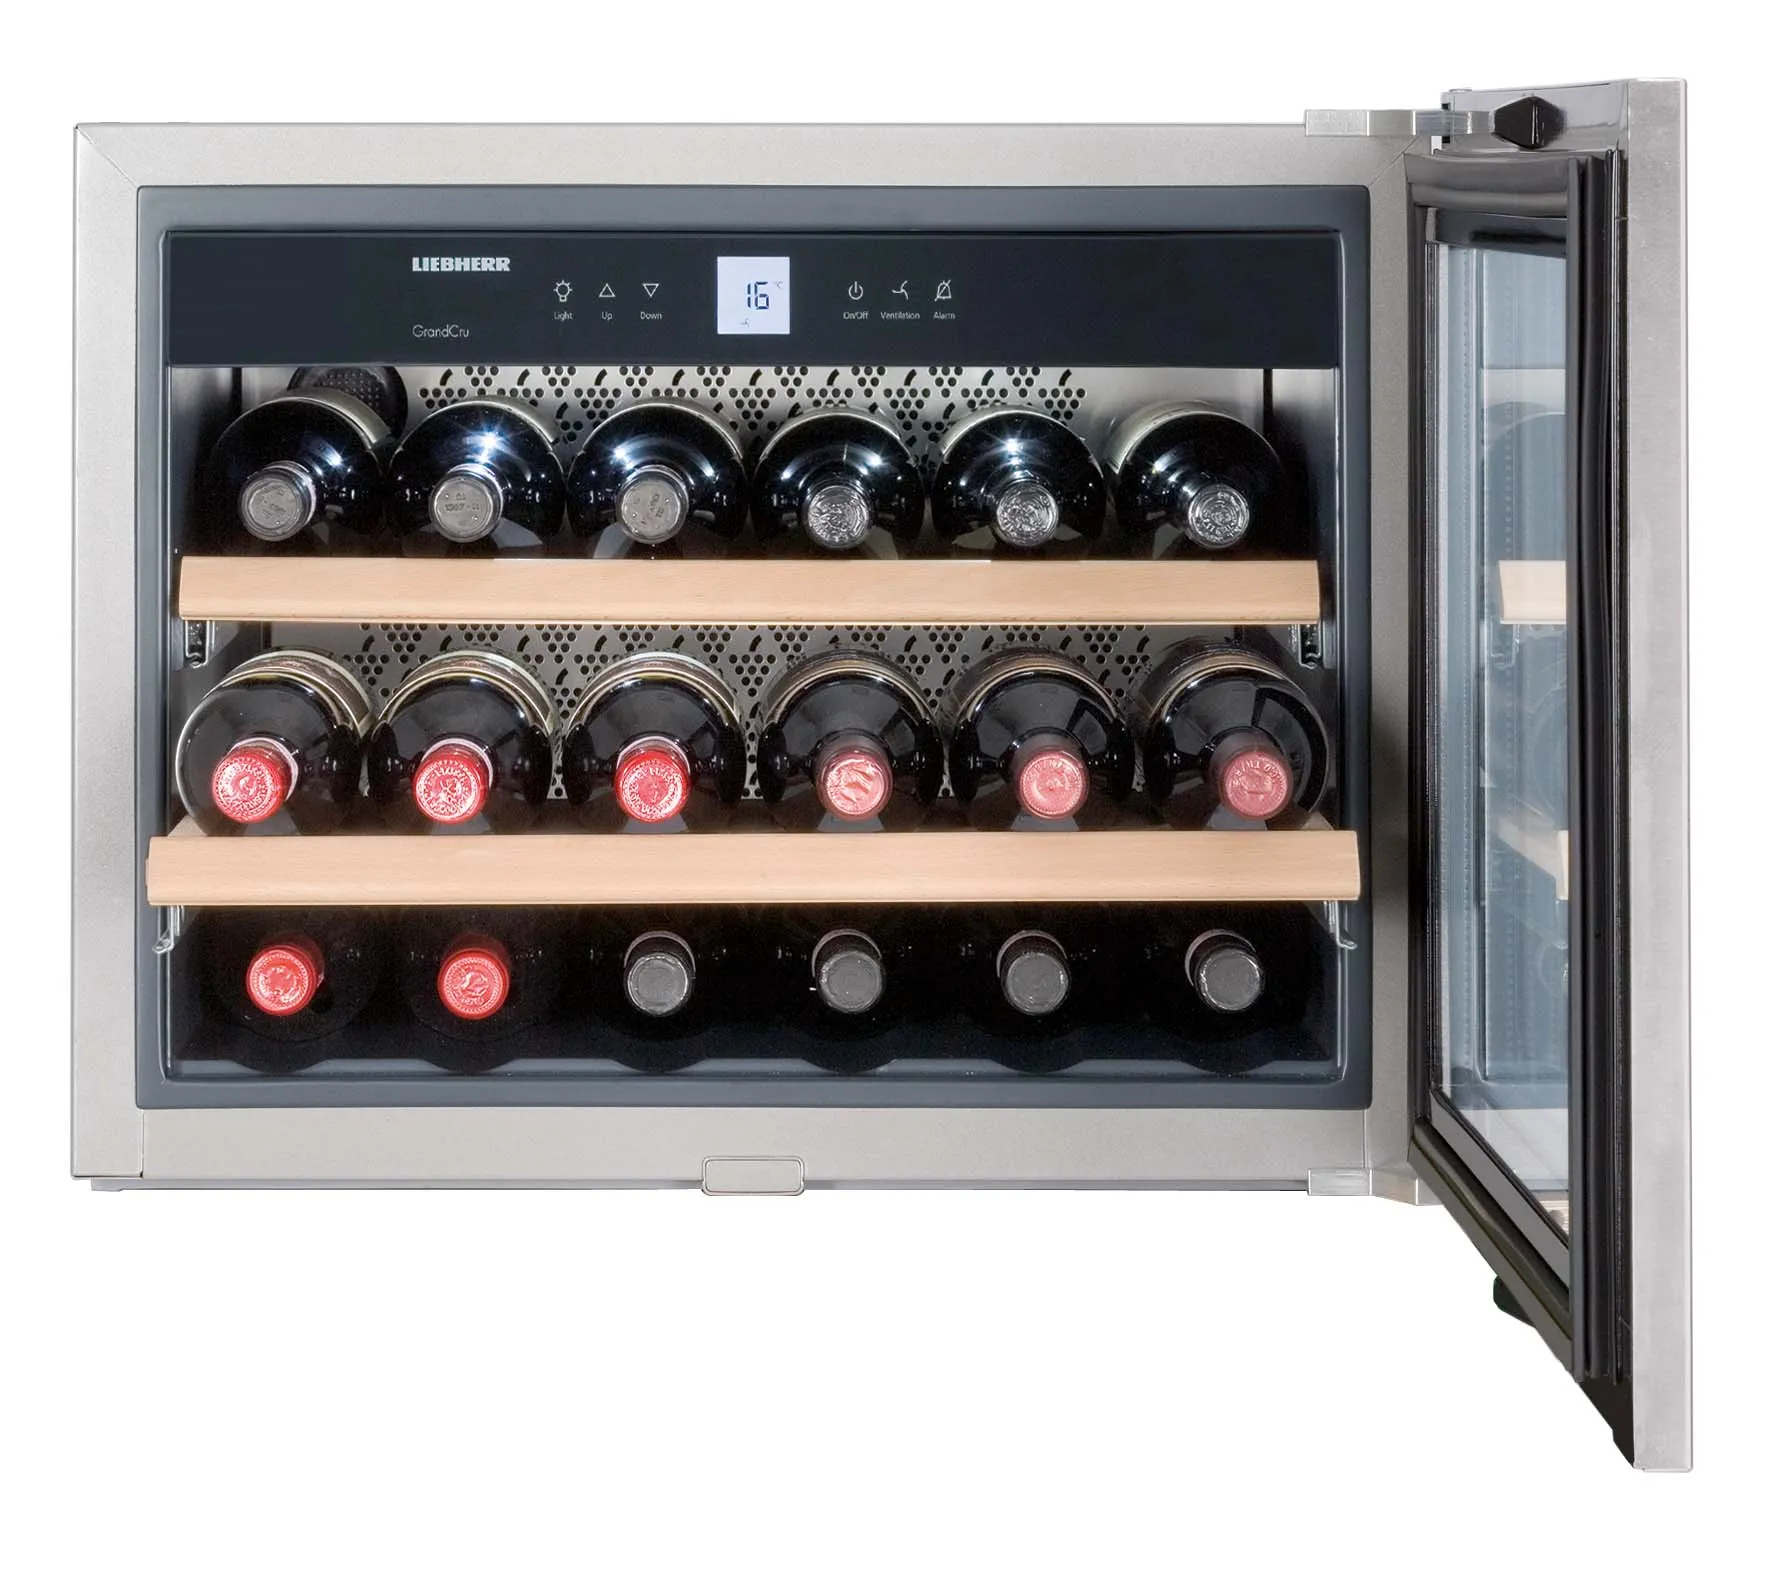 GrandCru air-conditioned cellars that can be integrated -Niche height 45 cm WKEes 553 Liebherr